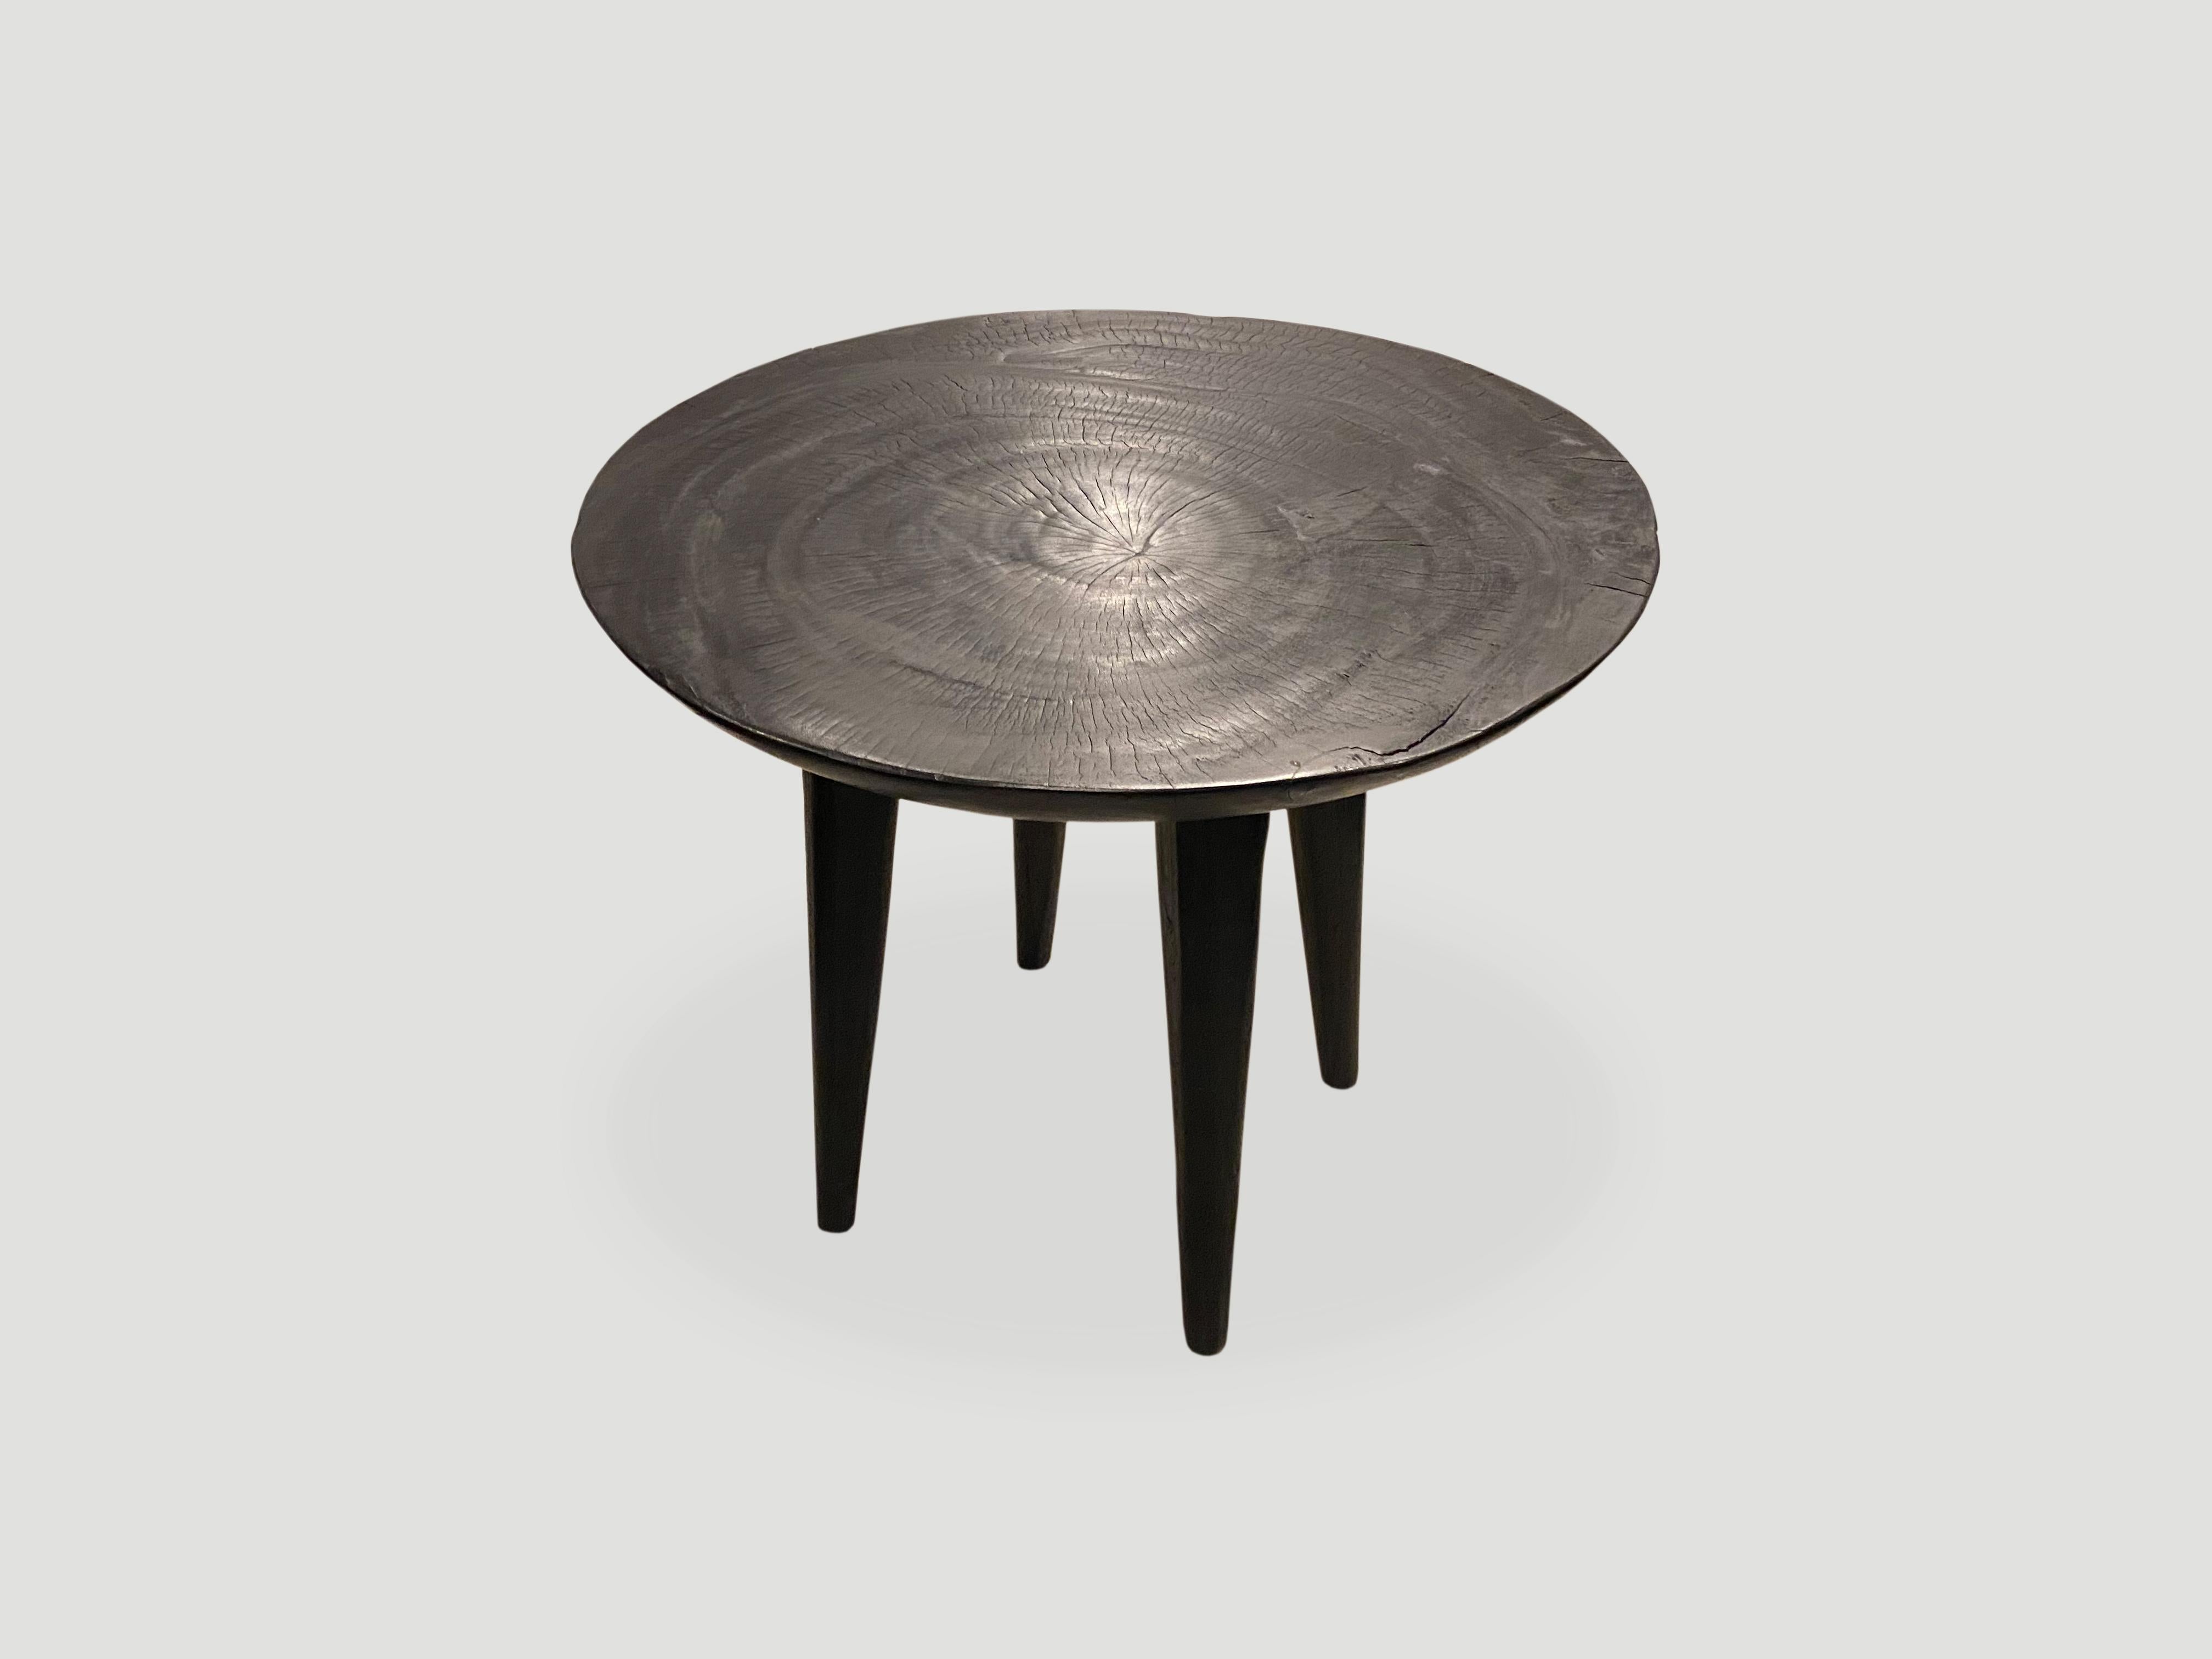 Minimalist charred mango wood side table with a four inch bevelled top resting on cone style legs. Charred, sanded and sealed revealing the beautiful wood grain. Custom stains and finishes available. Please inquire.

Own an Andrianna Shamaris